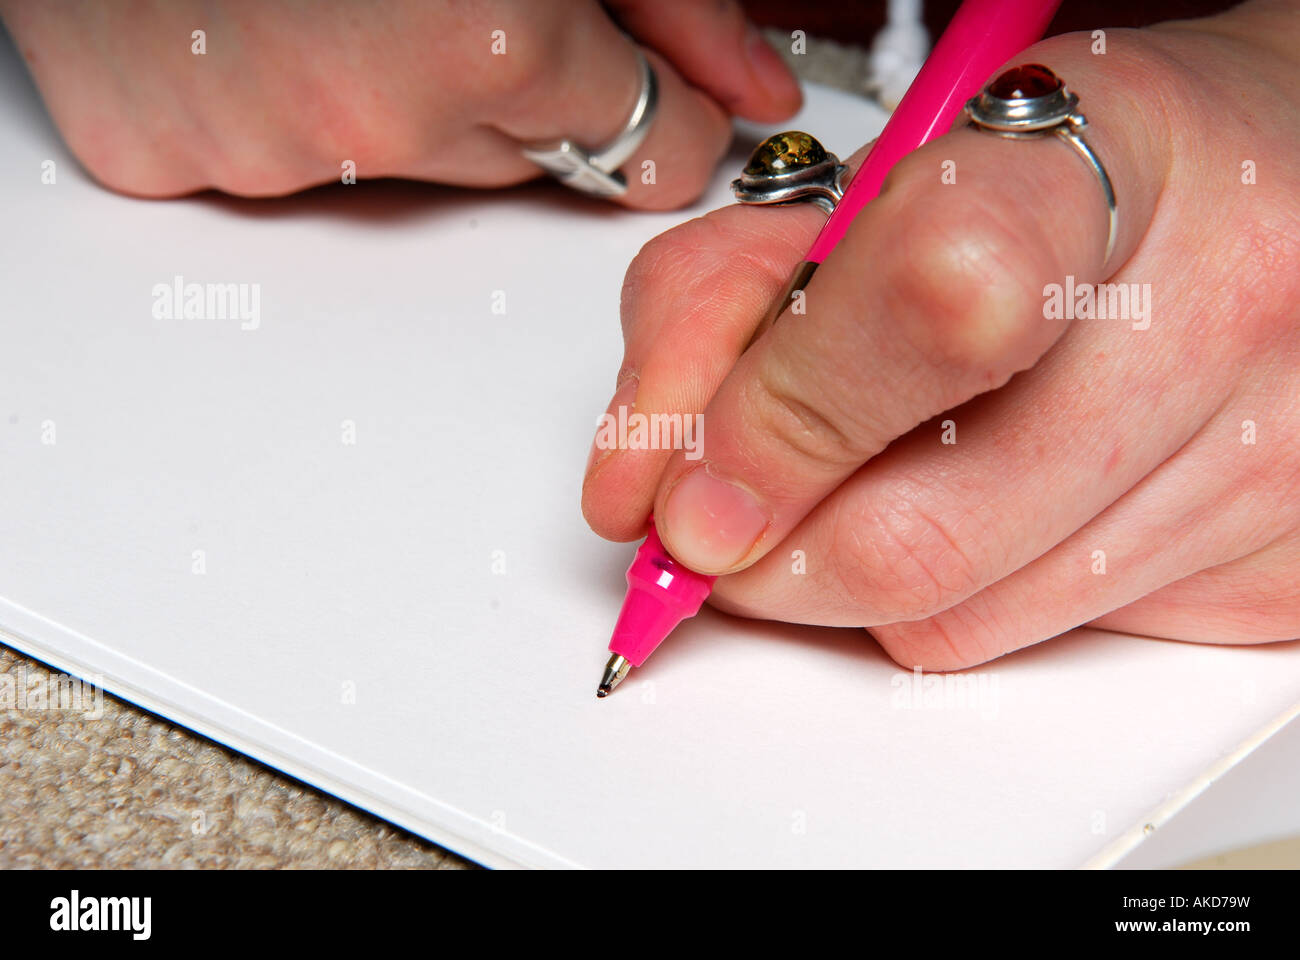 Hand writing on blank paper. Stock Photo